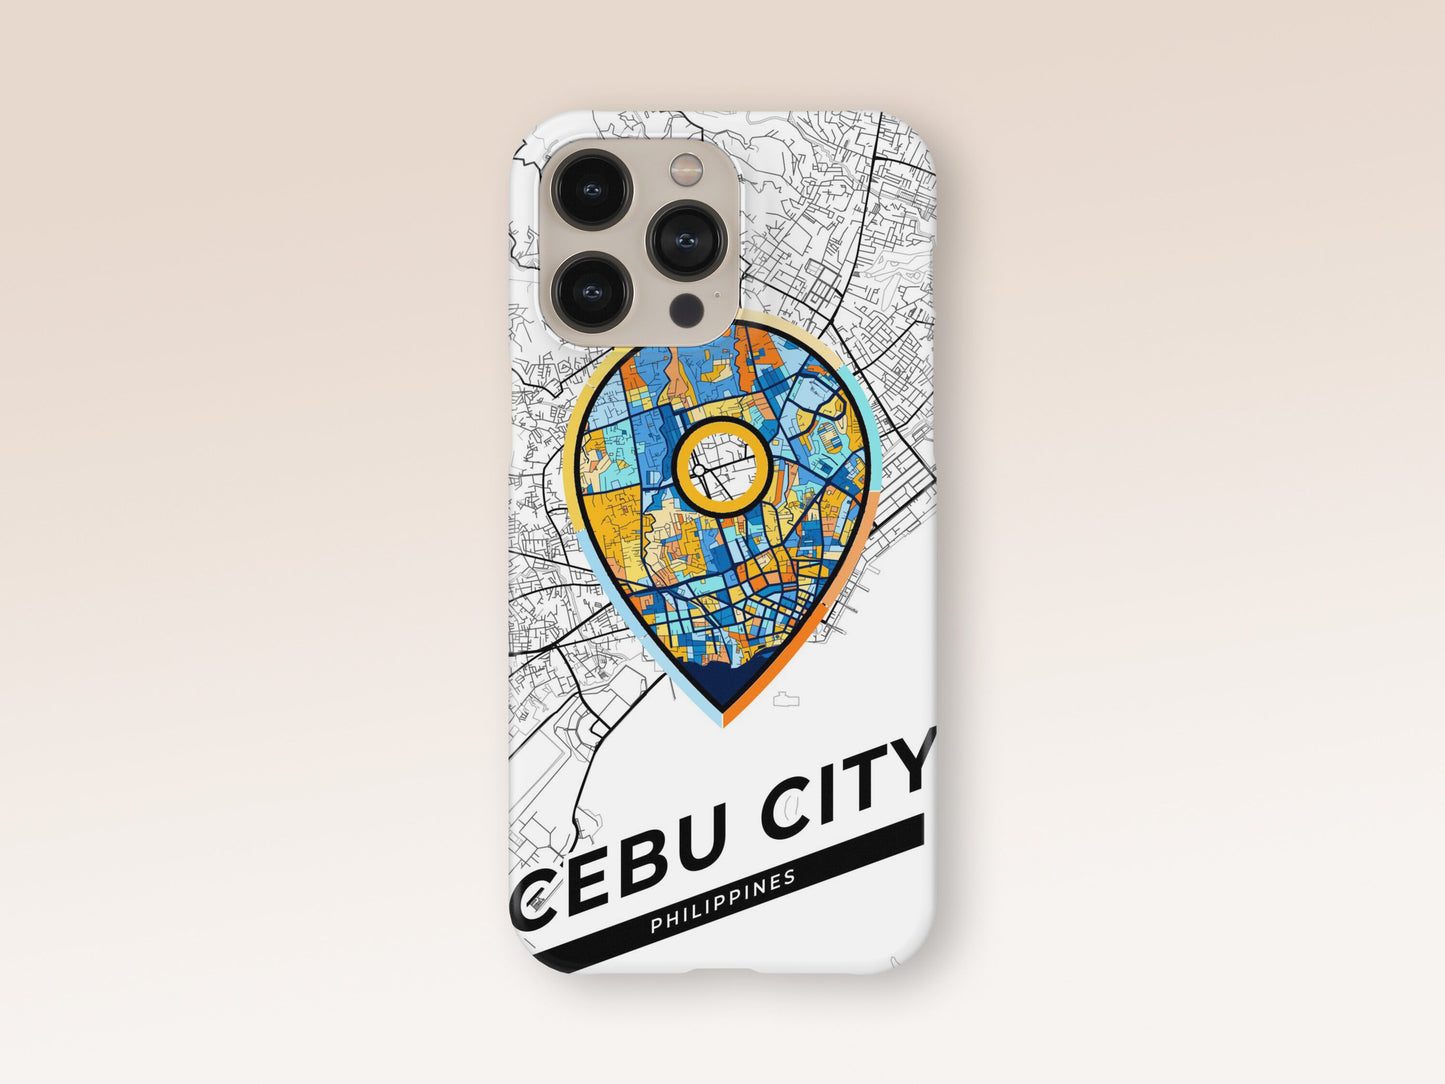 Cebu City Philippines slim phone case with colorful icon. Birthday, wedding or housewarming gift. Couple match cases. 1